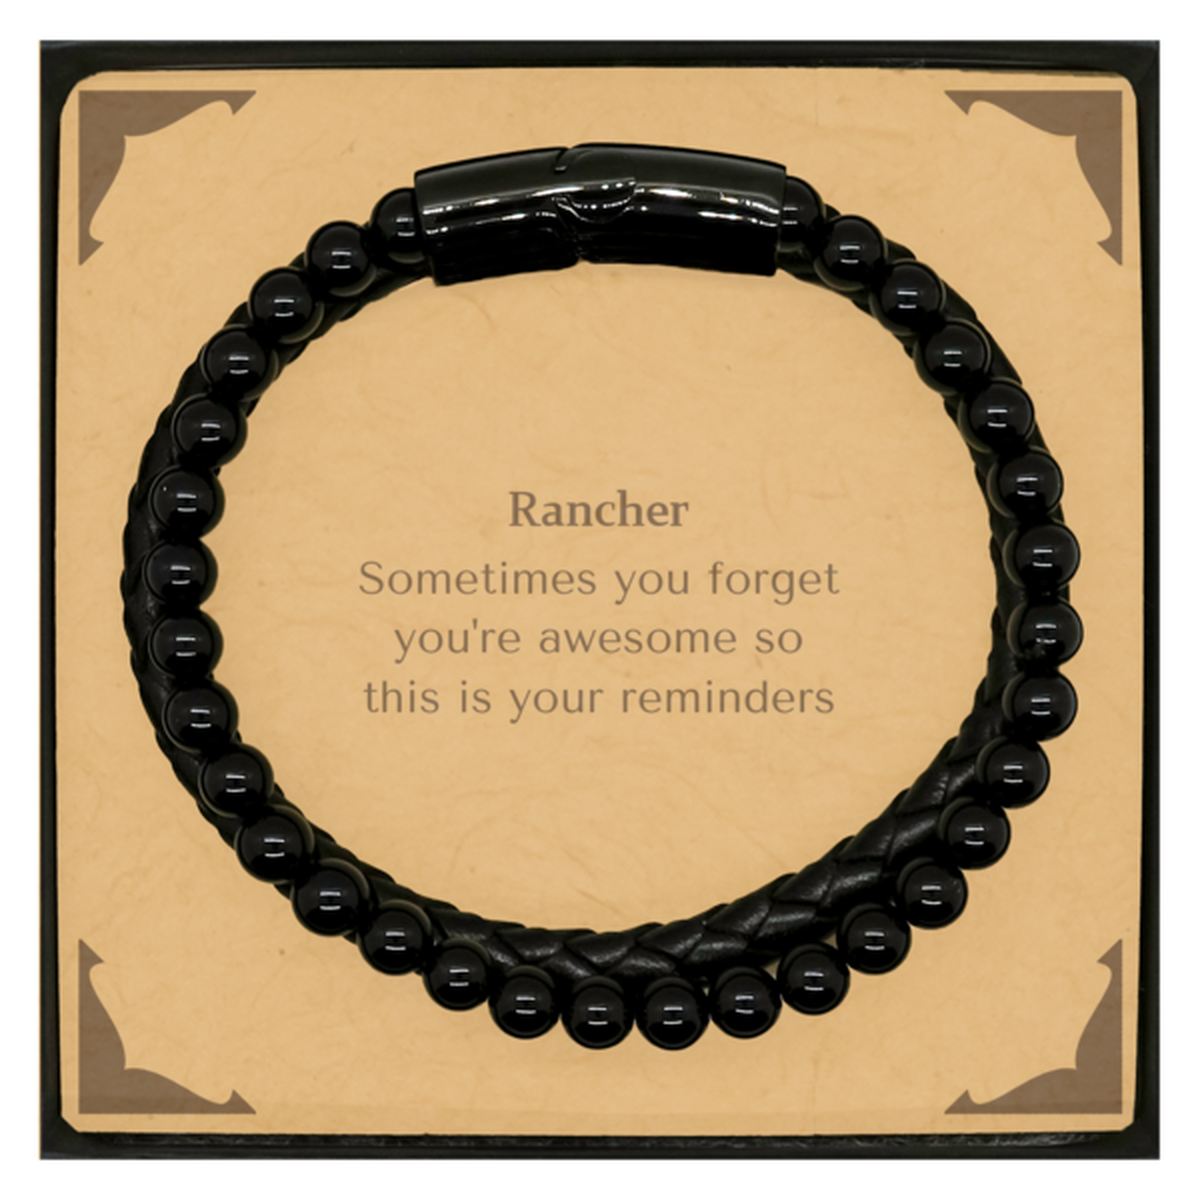 Sentimental Rancher Stone Leather Bracelets, Rancher Sometimes you forget you're awesome so this is your reminders, Graduation Christmas Birthday Gifts for Rancher, Men, Women, Coworkers